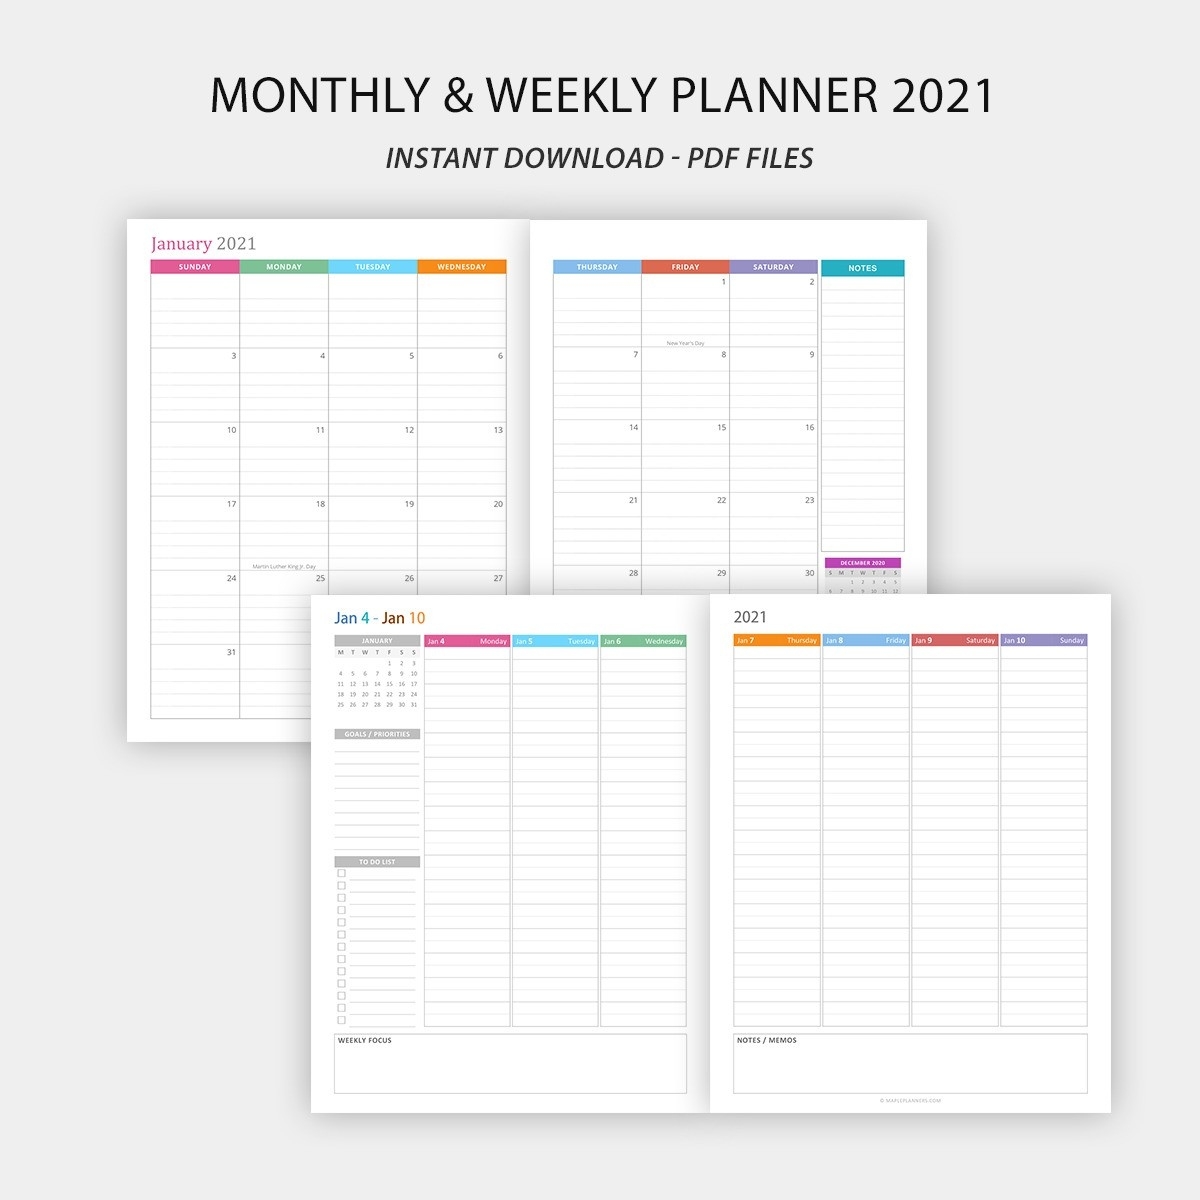 2021 Daily Planner Printable - Daily, Weekly And Monthly Planners Daily Calendar December 2021